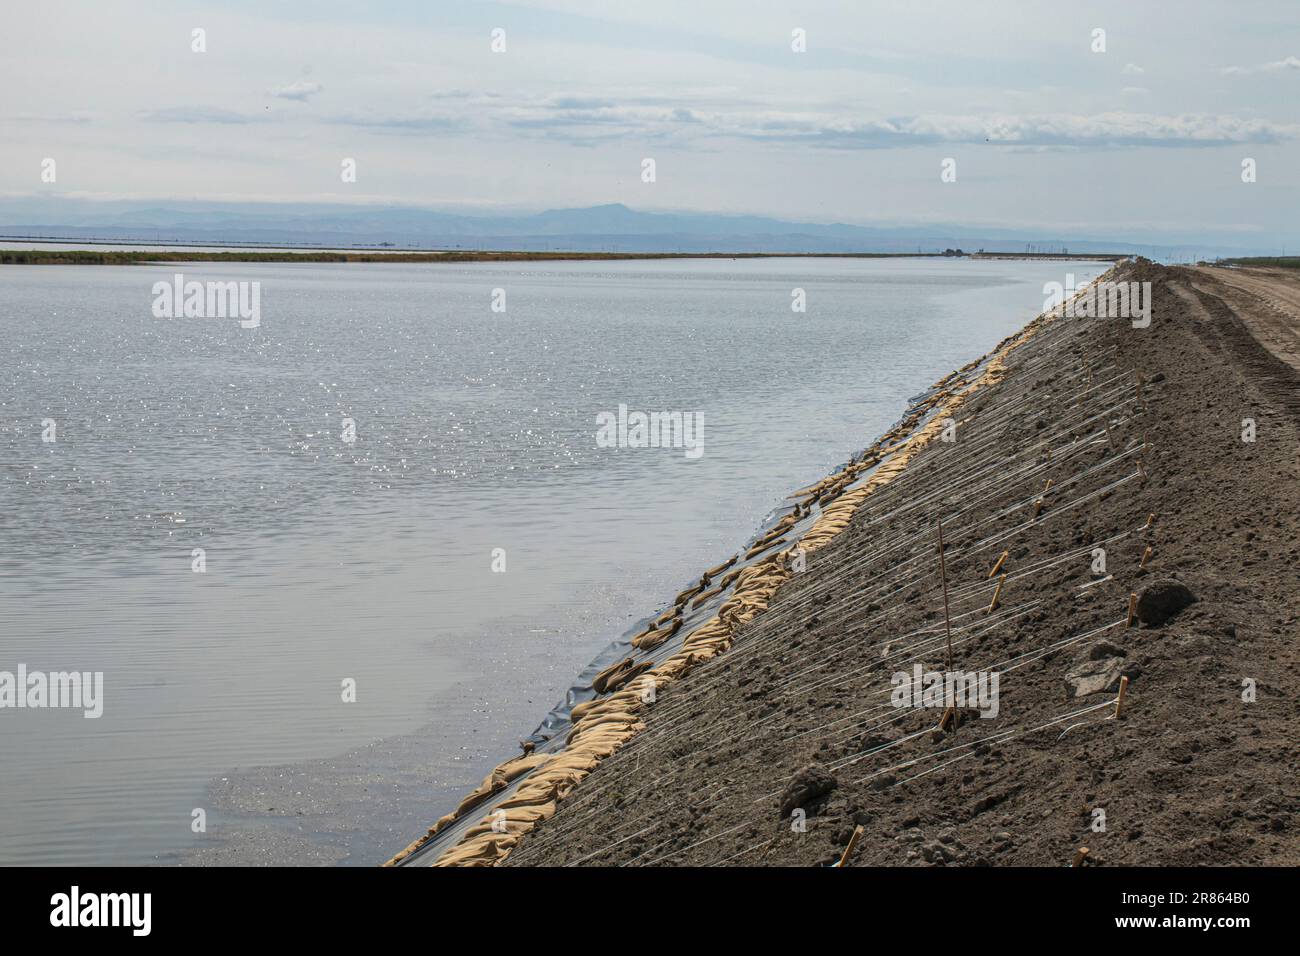 Levee protecting the town of Corcoran. Tulare Lake, located in ...